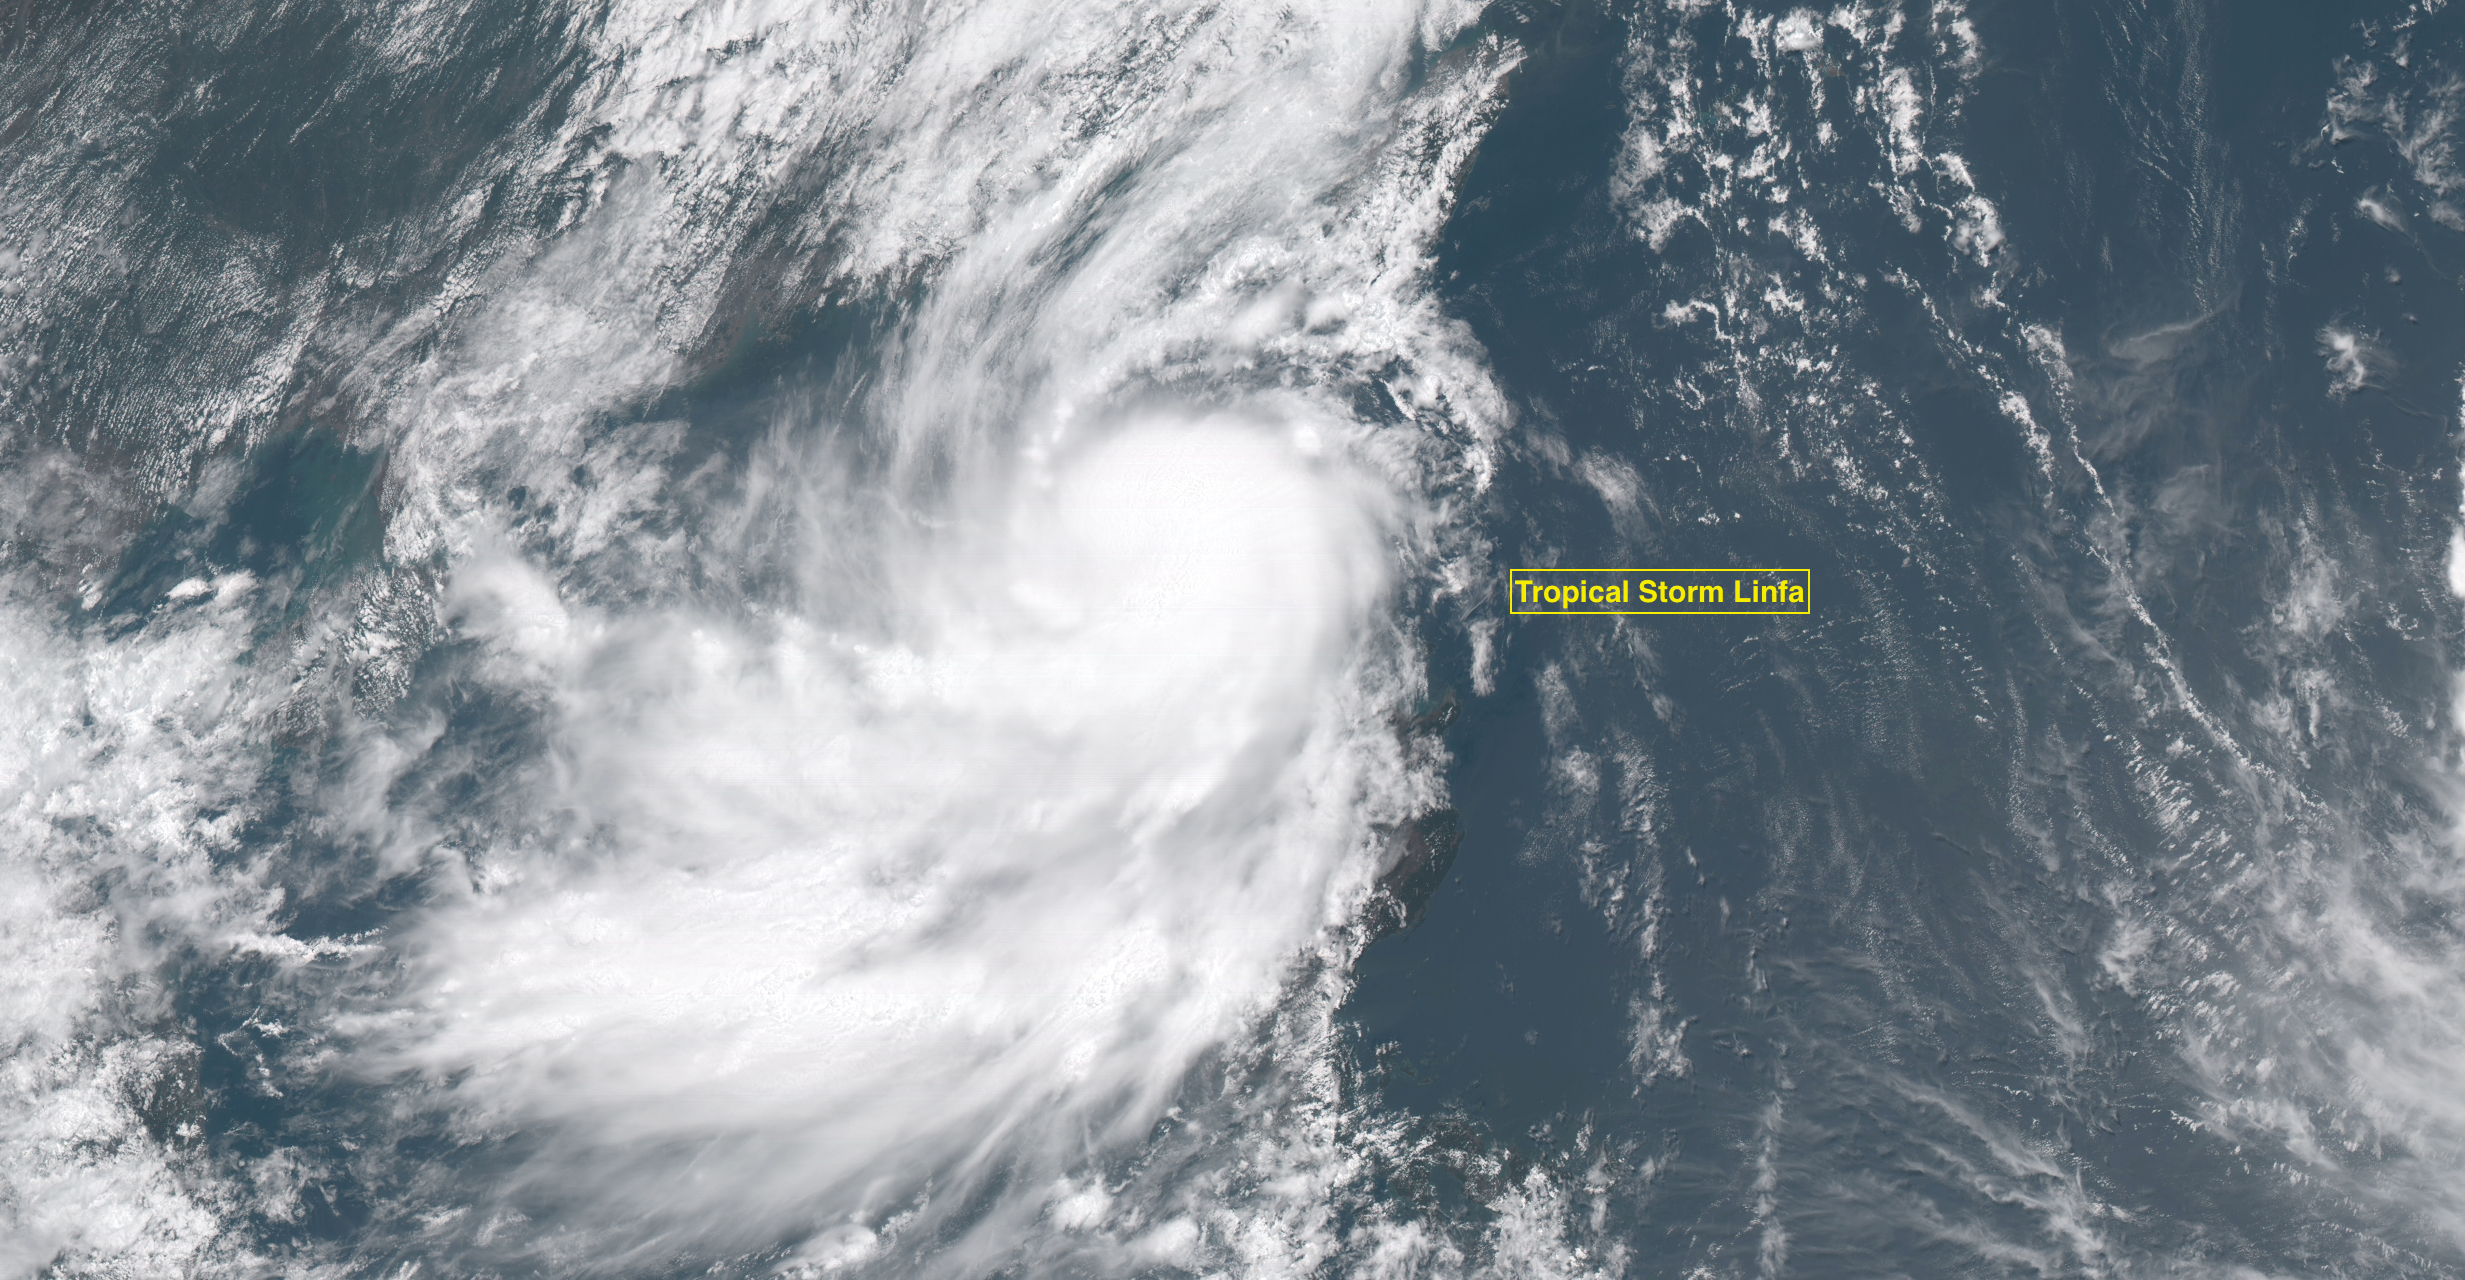 Tropical Storm Linfa off the coast of China